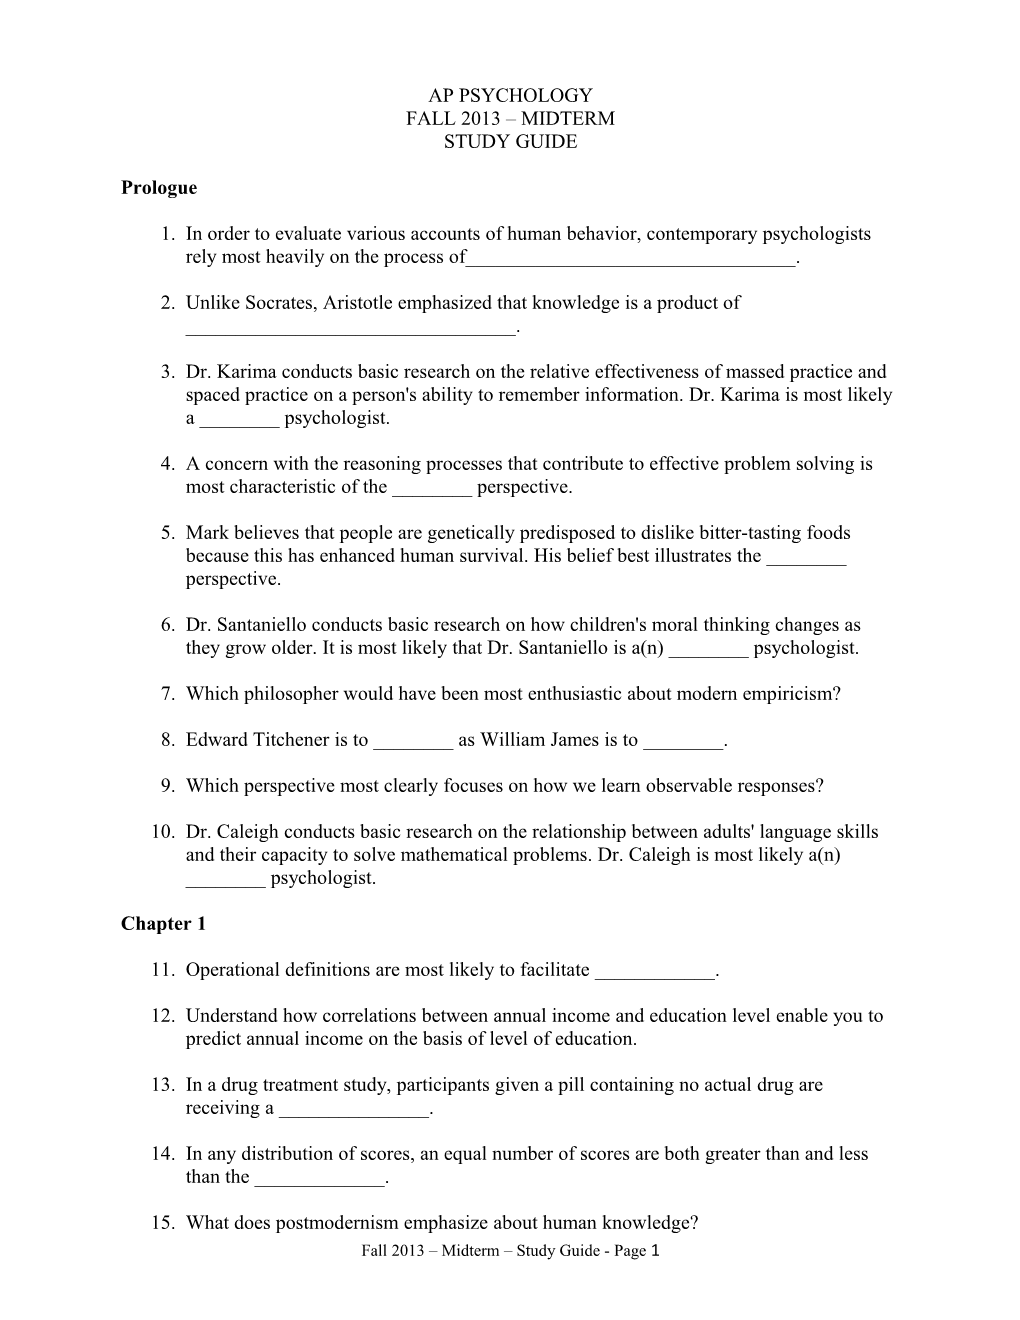 Fall 2013 Midterm Study Guide - Page 1